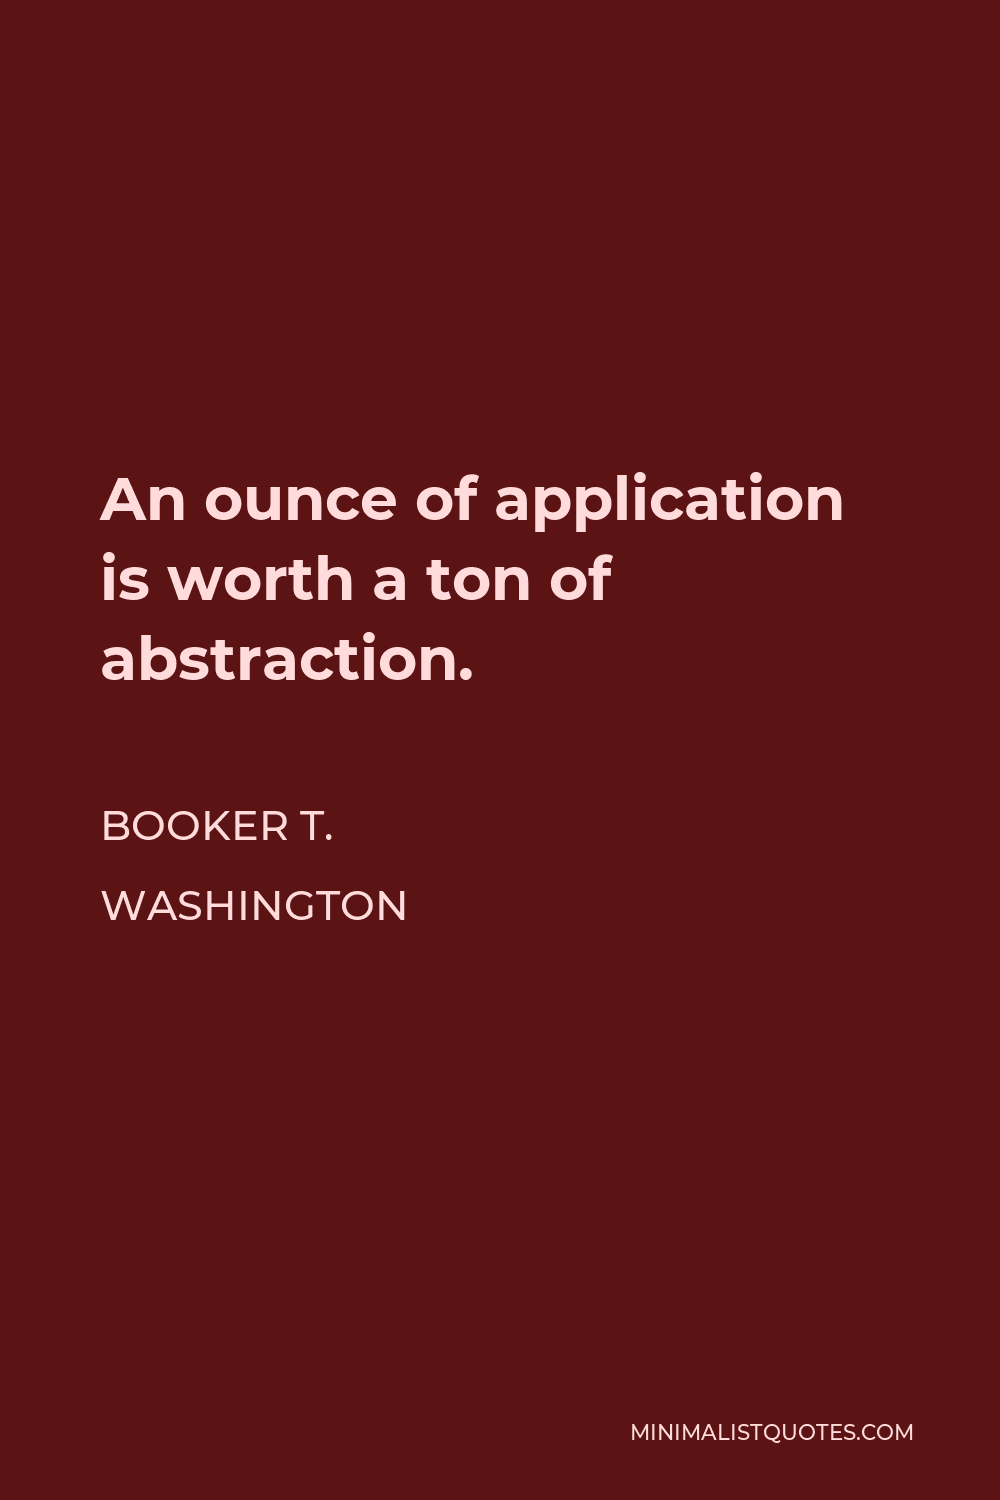 Booker T. Washington Quote - An ounce of application is worth a ton of abstraction.